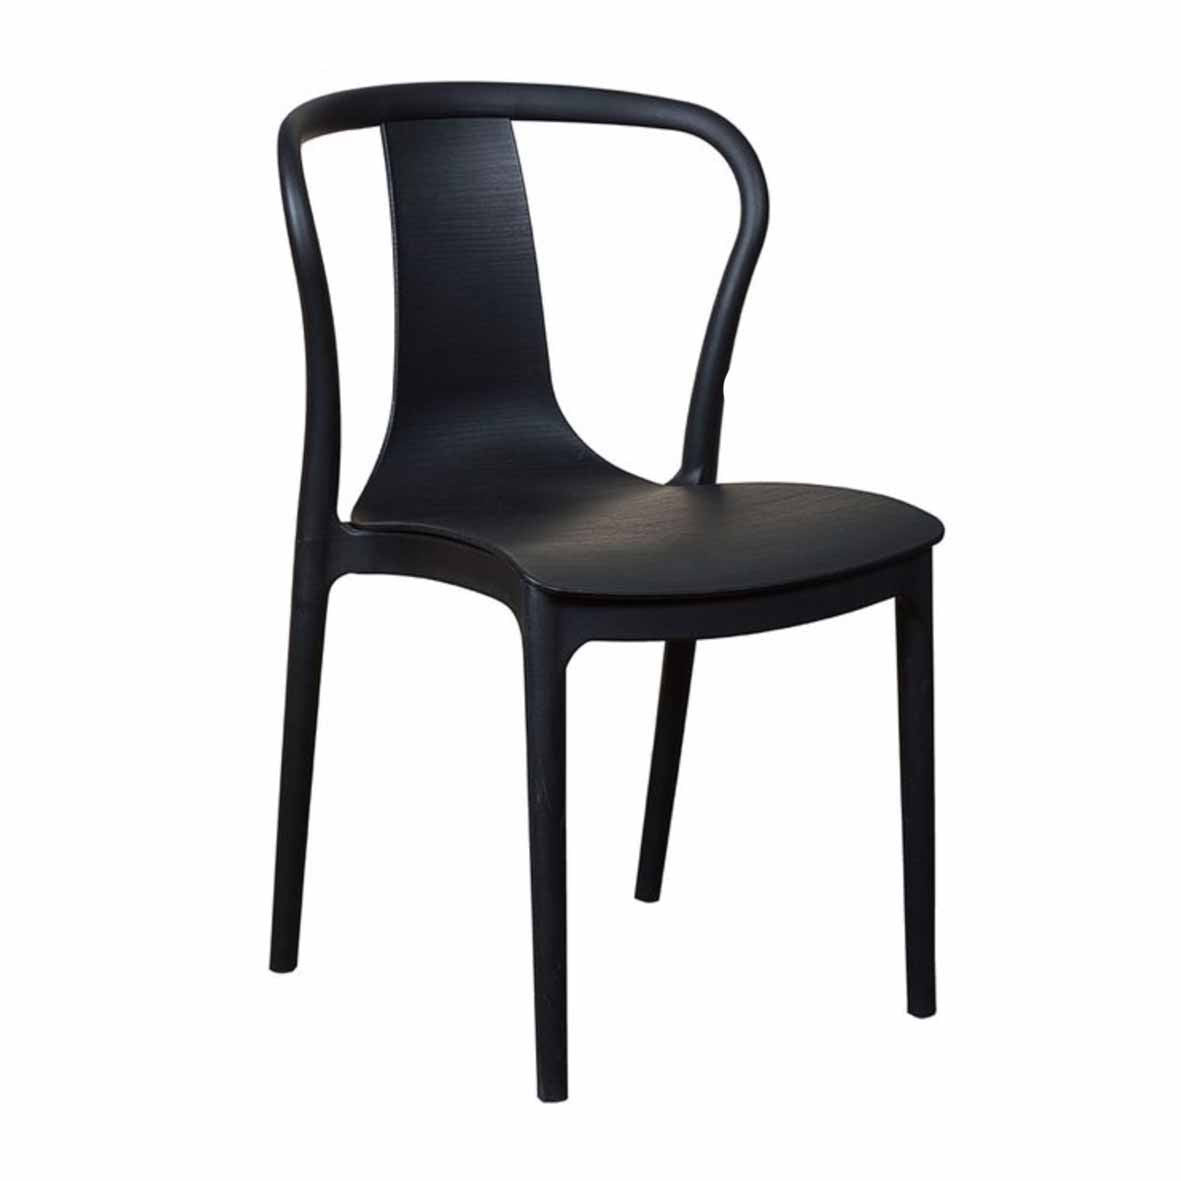 Black Conrad Dining Chair - All Weather